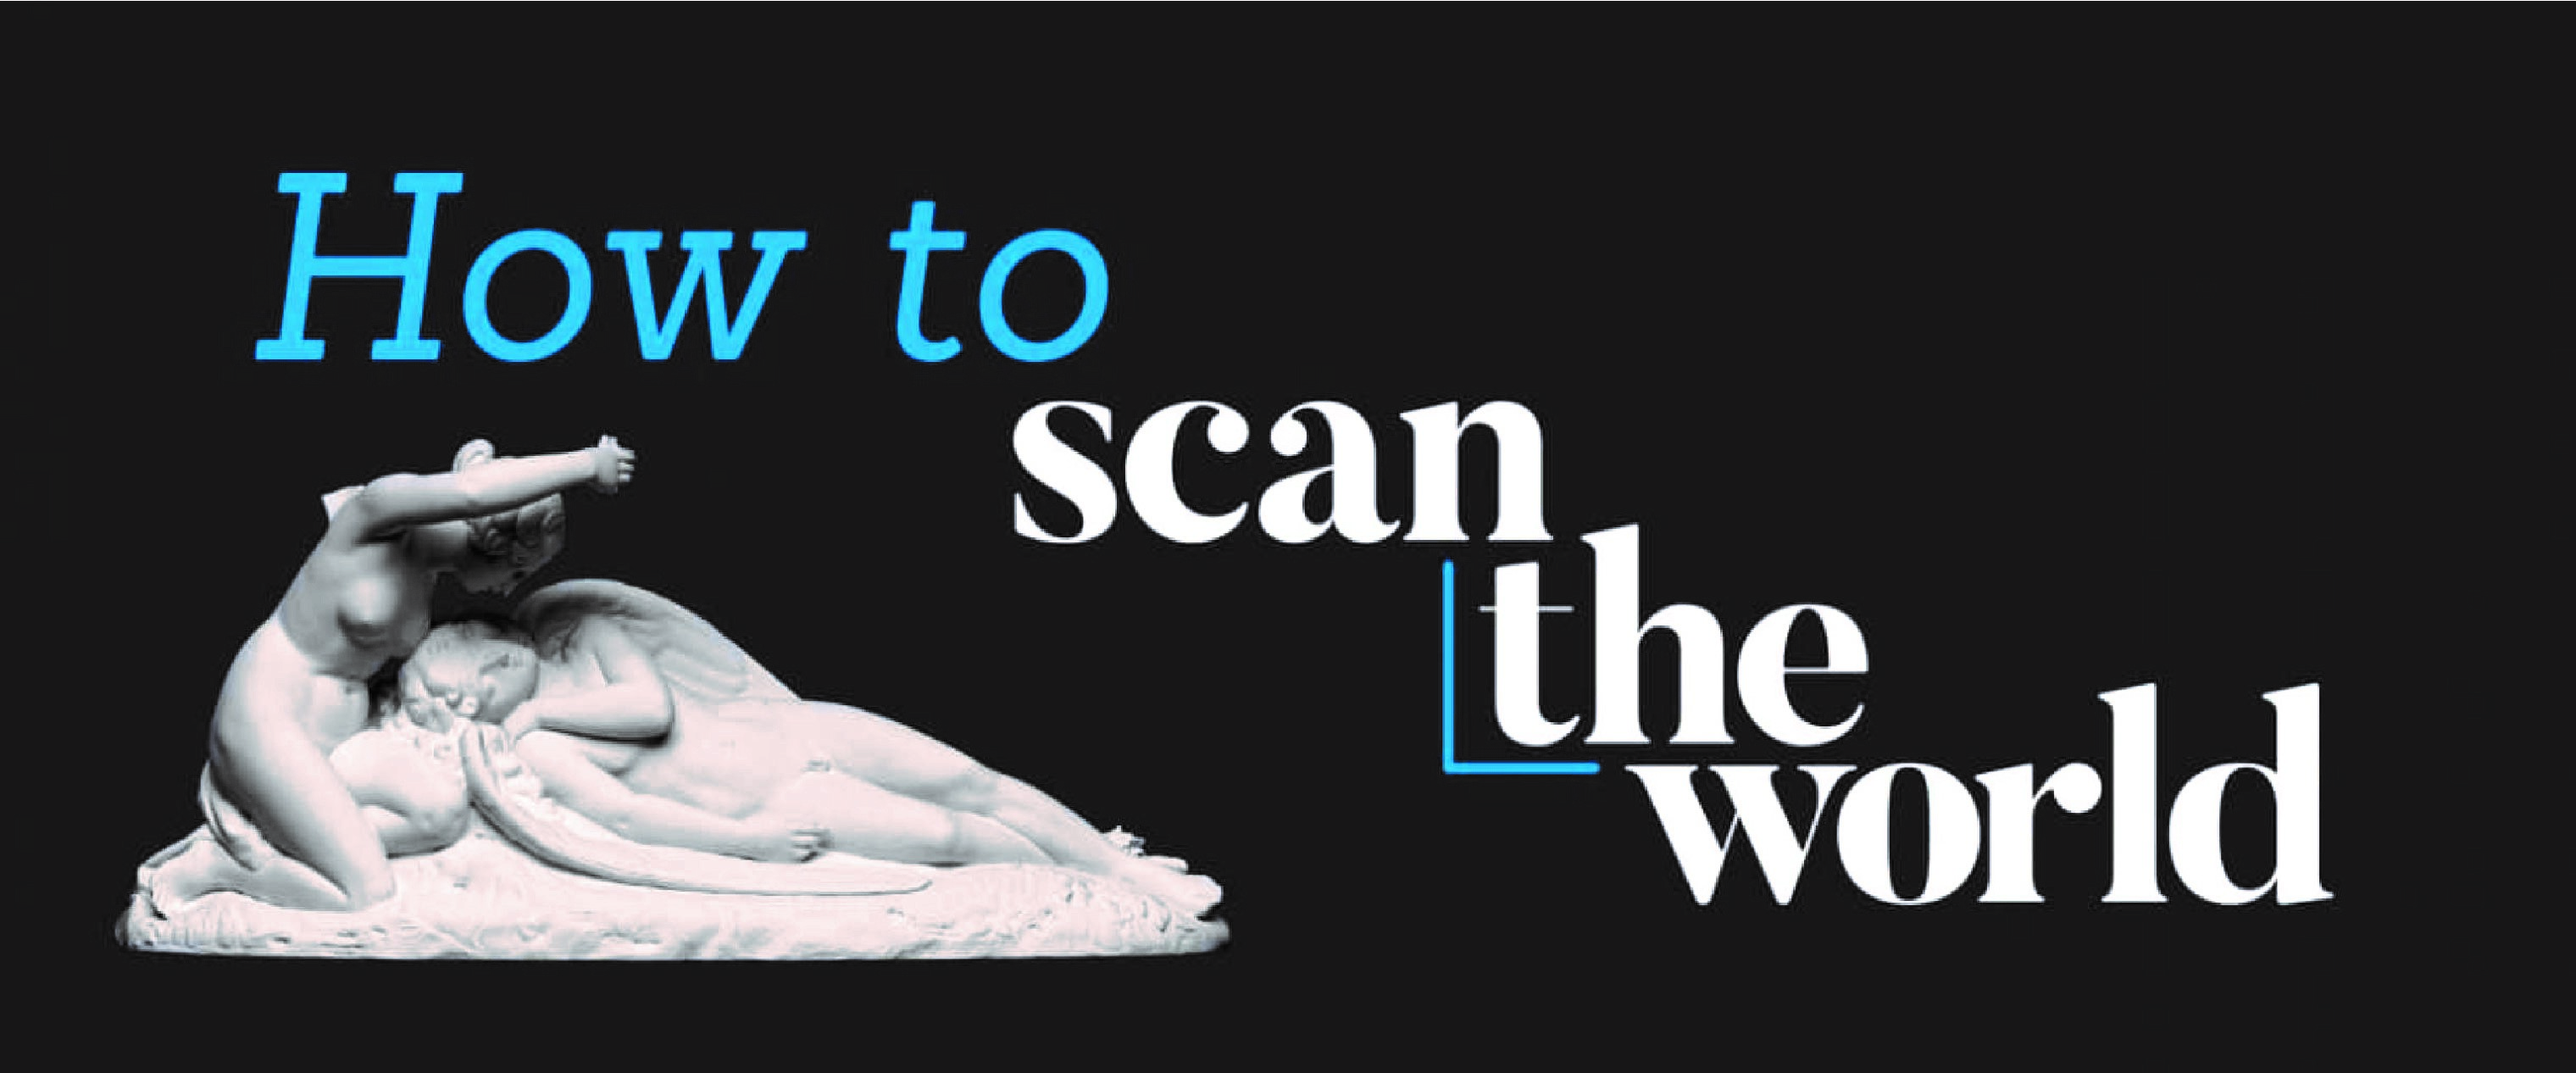 How to scan the world